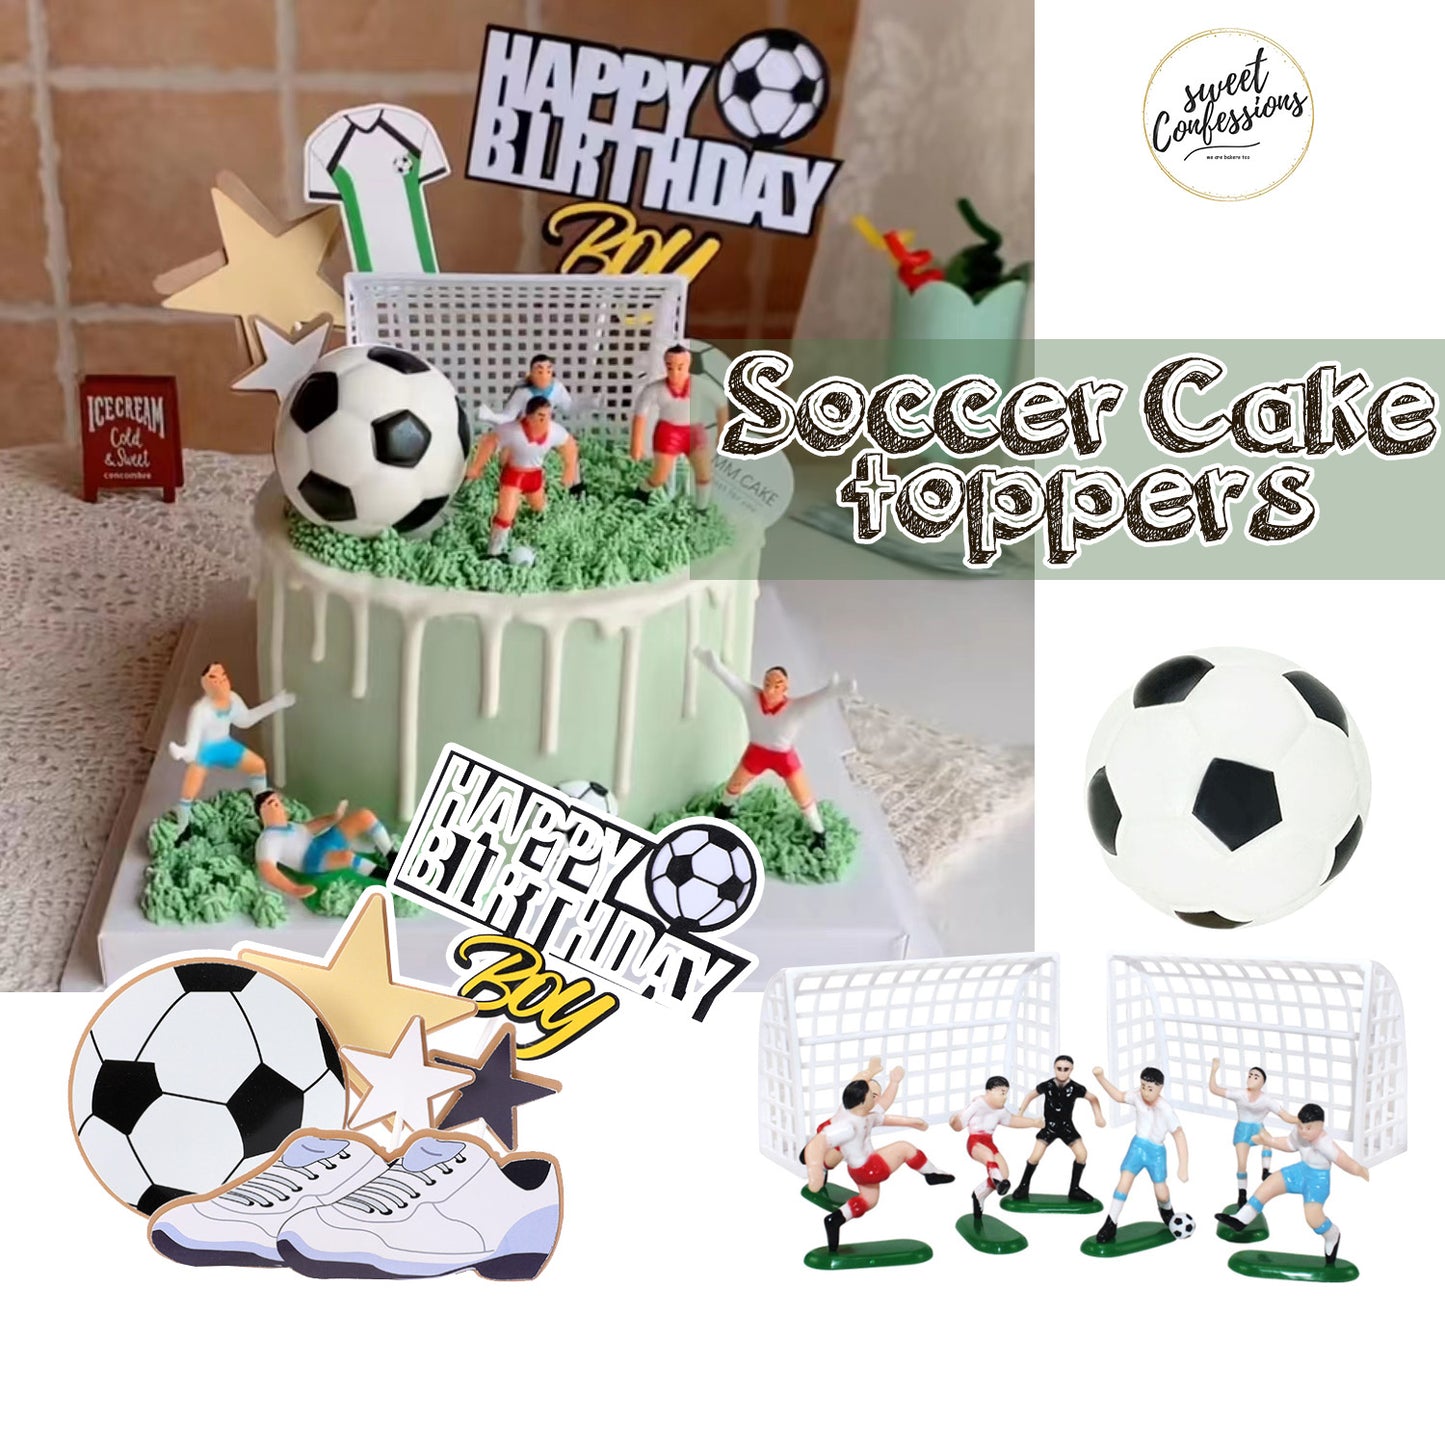 Soccer cake toppers or football cake topper decoration for cupcake